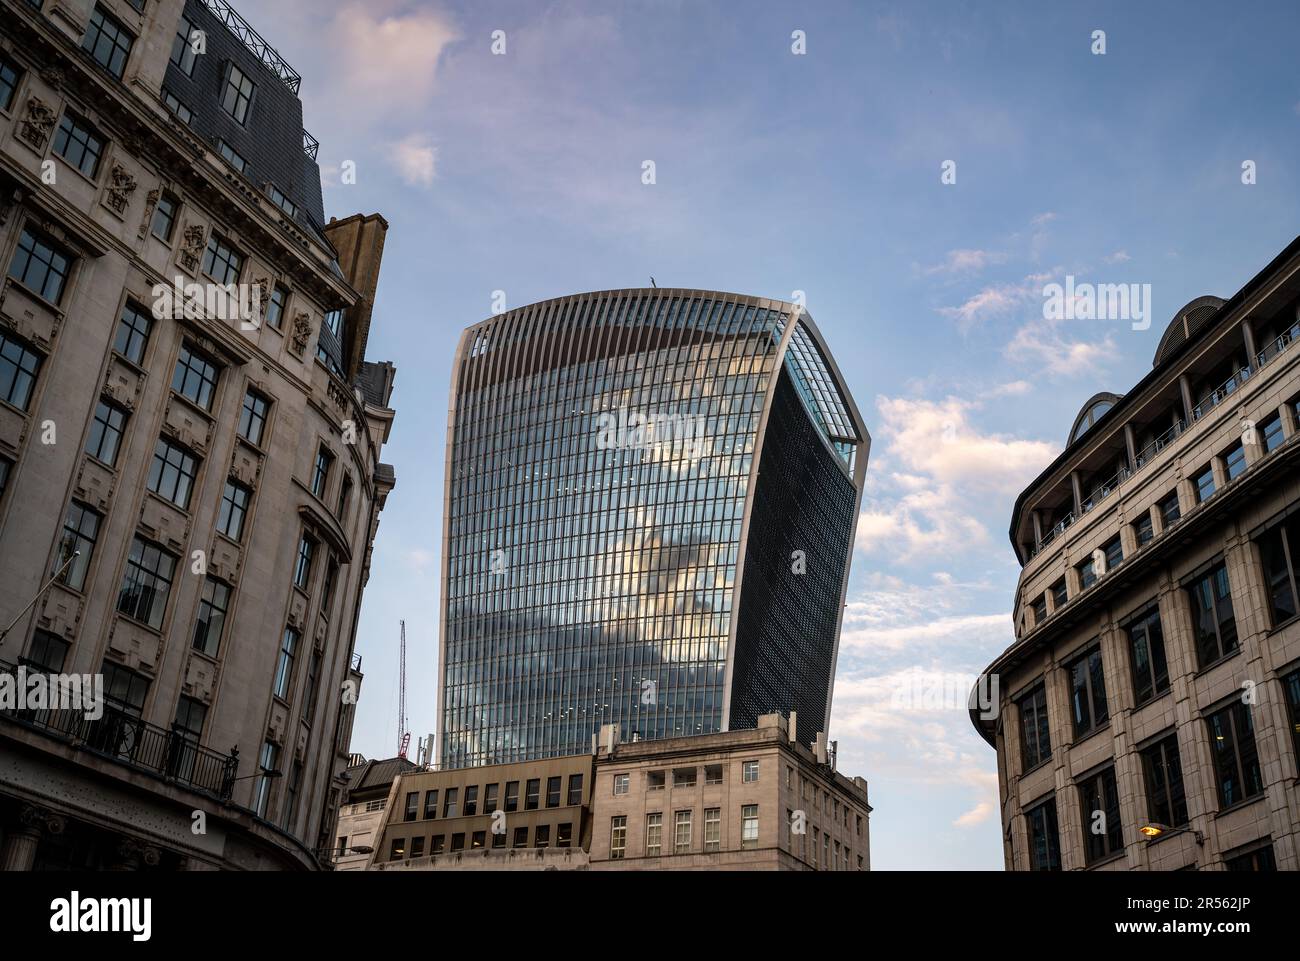 London, UK: Looking up at the Walkie-Talkie building or Fenchurch Building at 20 Fenchurch Street in the City of London. Stock Photo